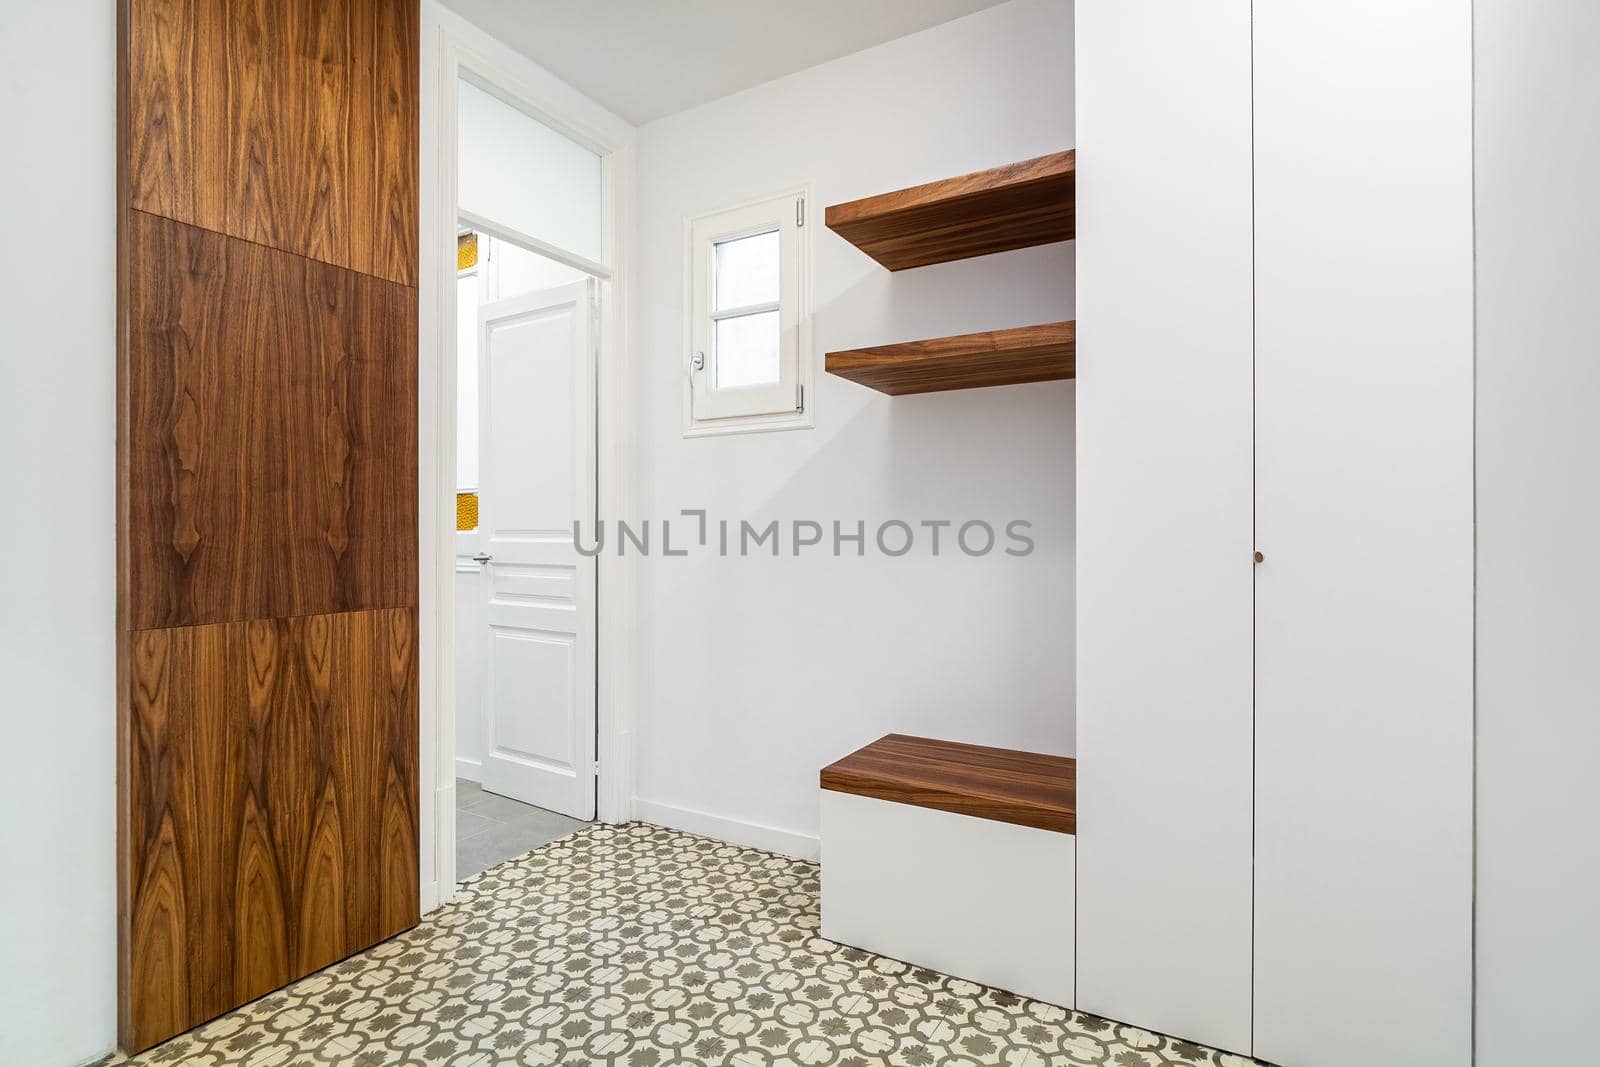 Modern home interior with white walls and cabinets. Hallway with wooden finishing